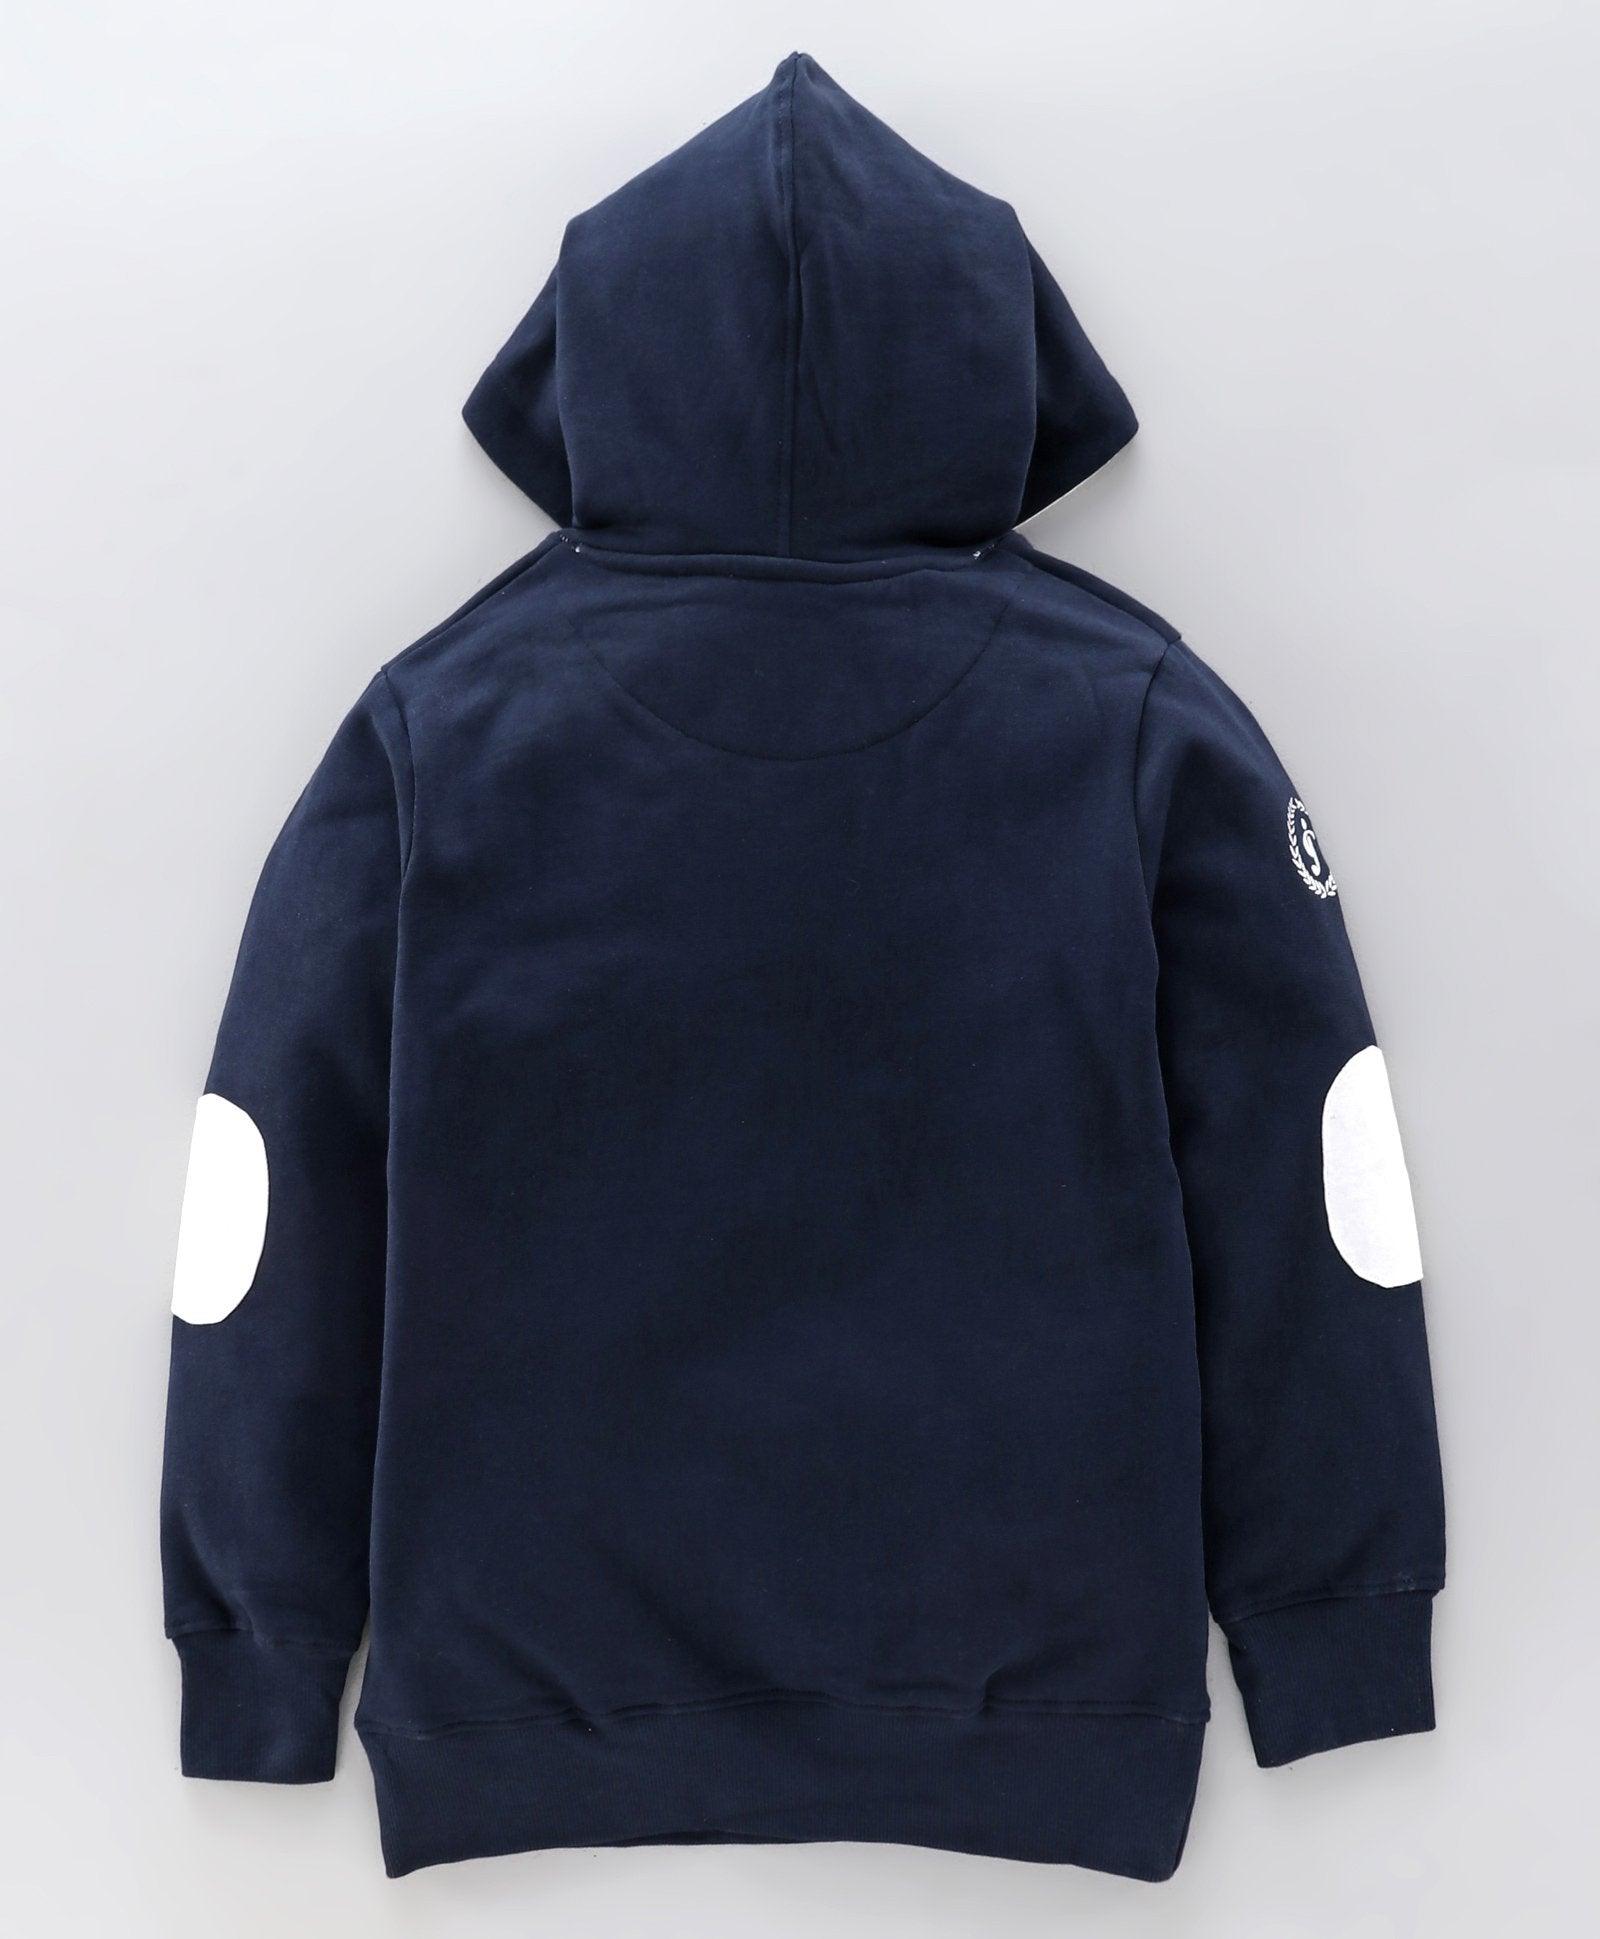 Young Boys Graphic Printed Hoody - Juscubs